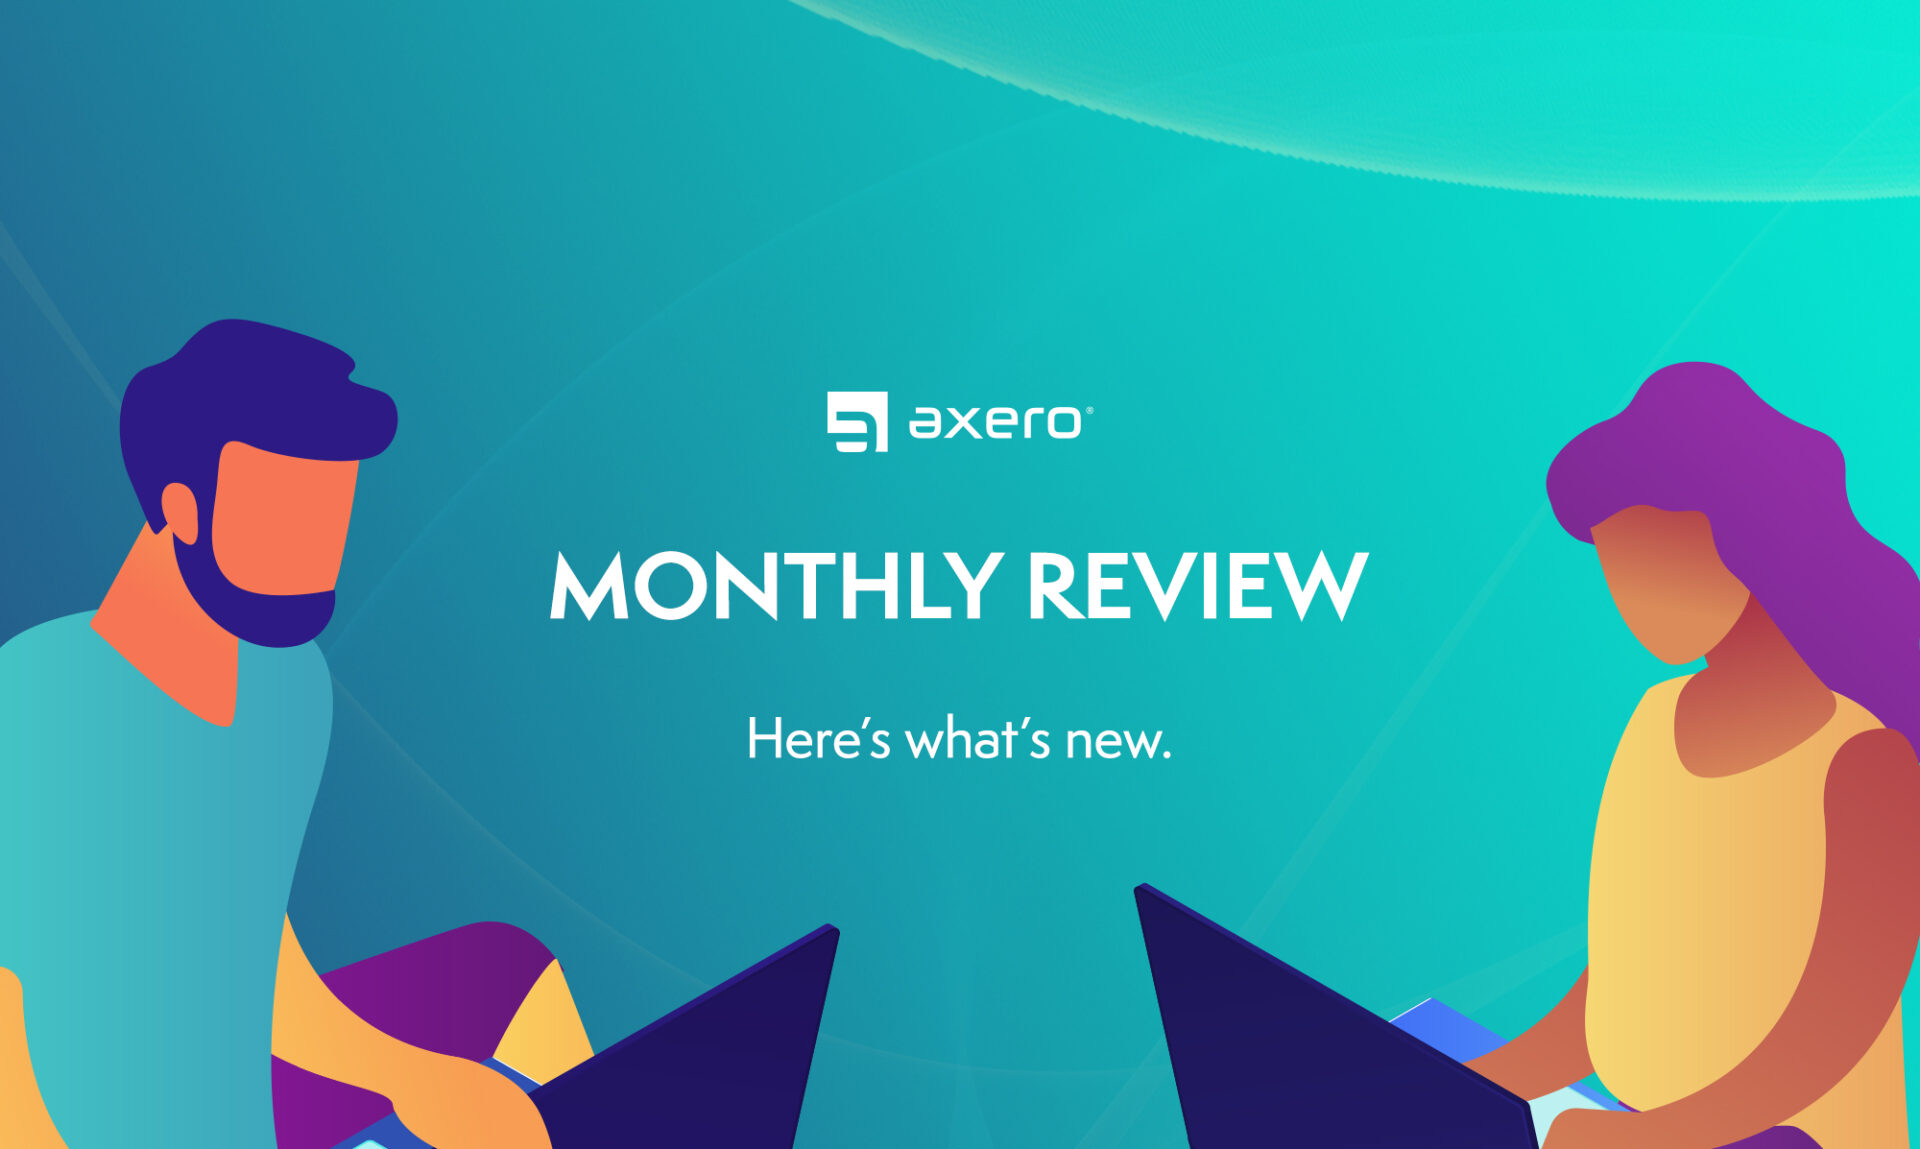 See the latest Axero announcements, updates, releases, and more.